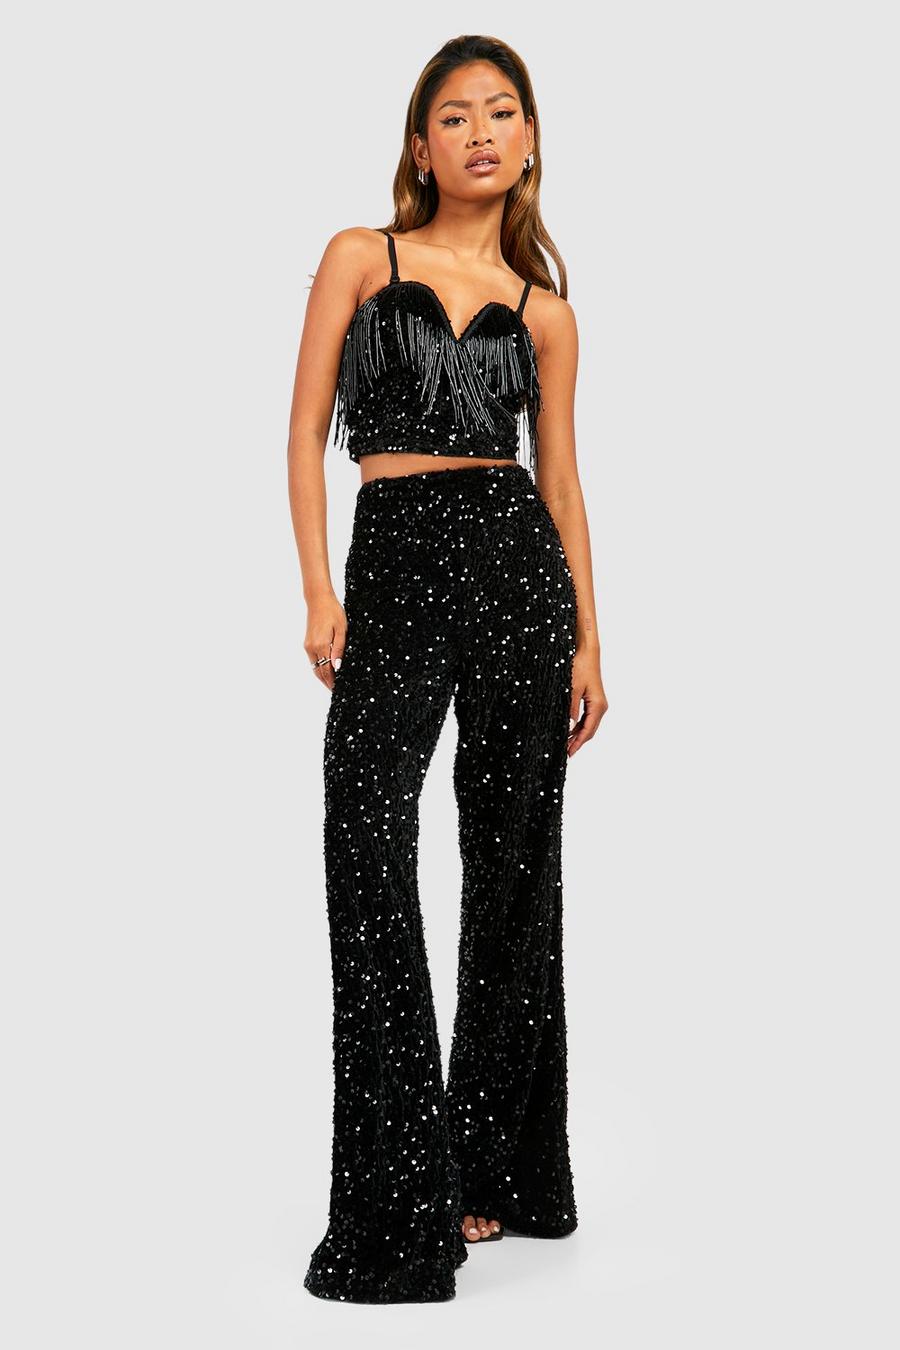 Chic Black Sequin Pants - All Bottoms